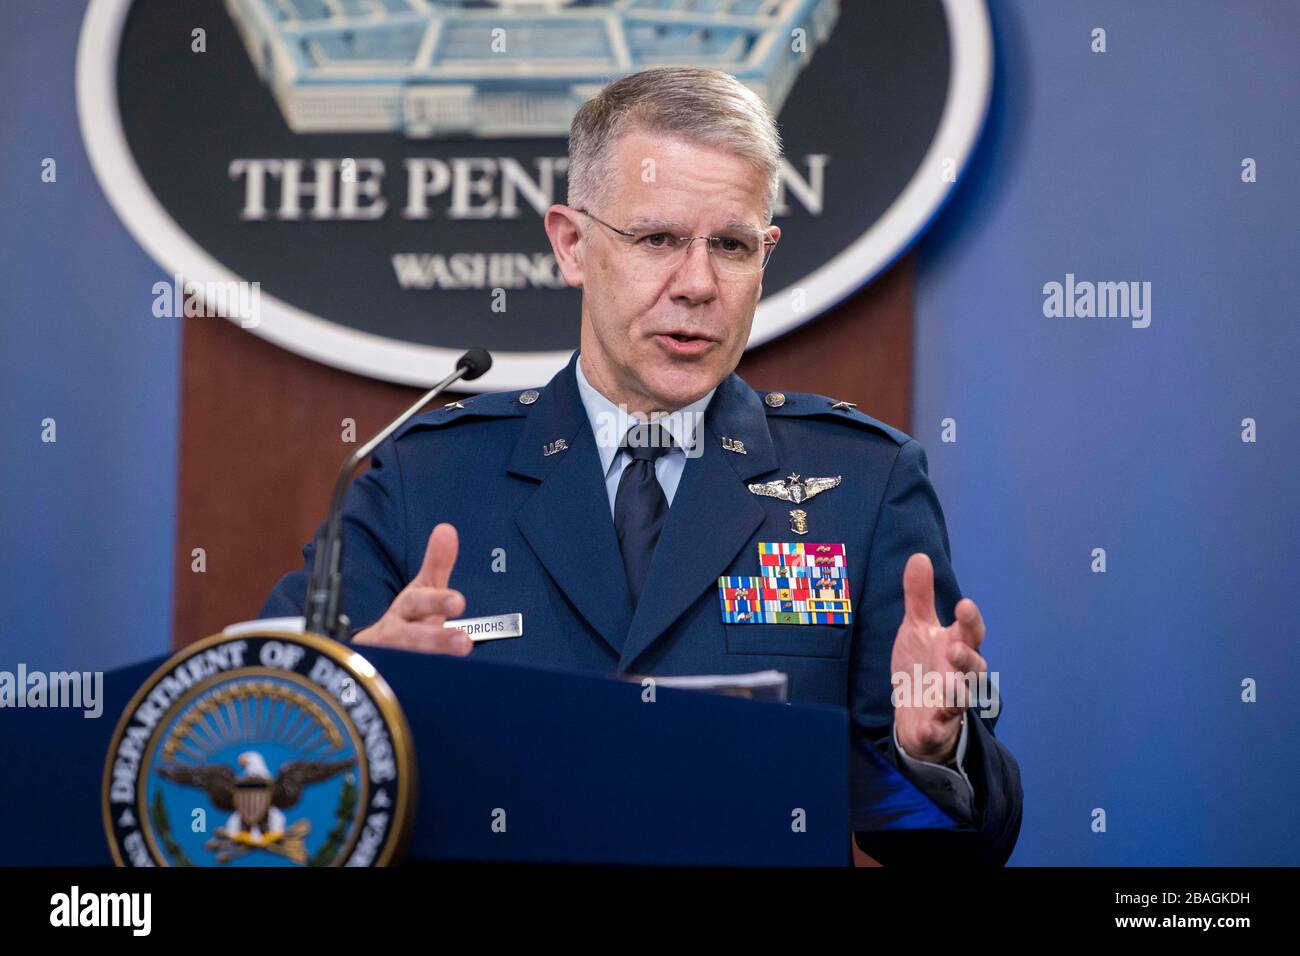 U.S. Joint Staff Surgeon Air Force Brig. Gen. Paul Friedrichs, MD,, briefs reporters on the COVID-19 pandemic at the Pentagon March 16, 2020 in Arlington, Virginia. Stock Photo